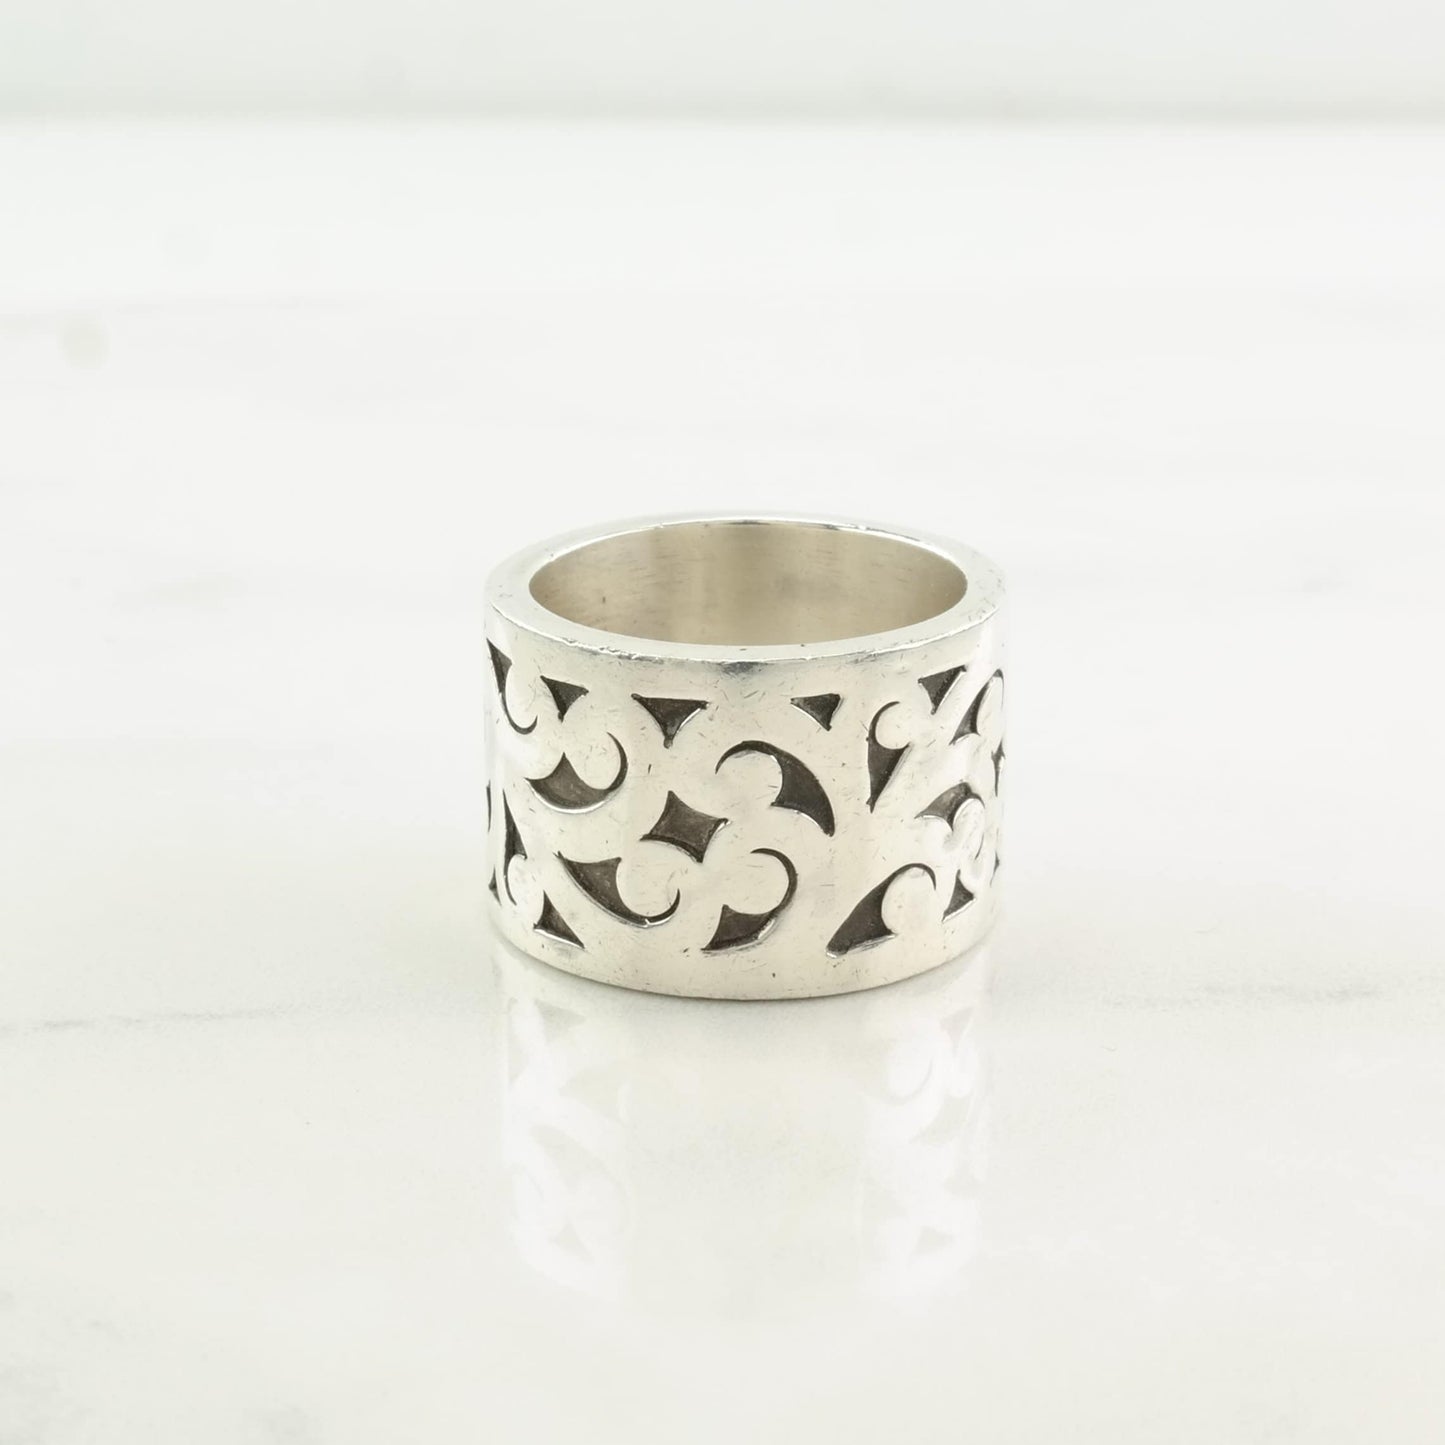 Vintage Lois Hill Sterling Silver Ring, Scroll Swirl design, Oxidized Finish Size 8